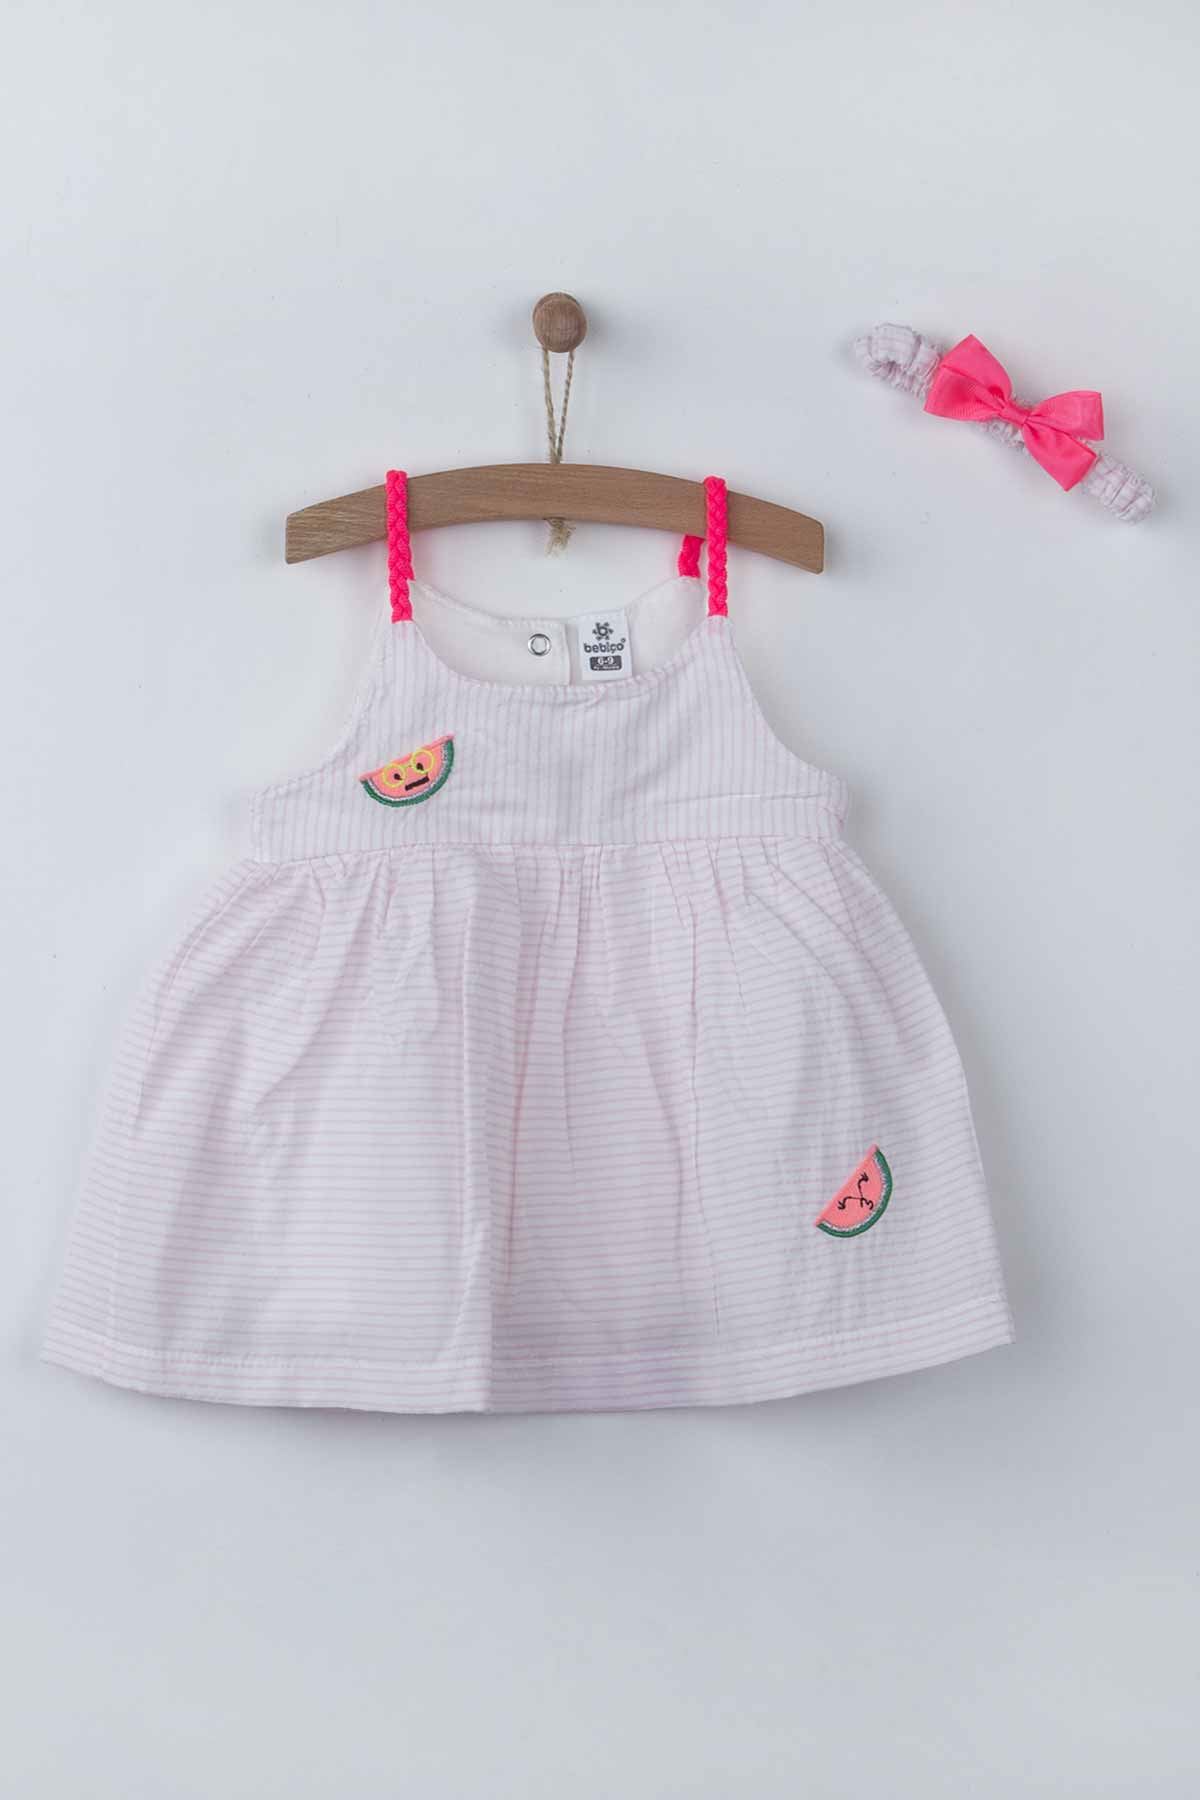 Pink Baby Girl Dress Summer 2-piece Suit Clothes Set Dress Hairband Cute Cute Babies outfit Holiday Beach Wear clothing Models